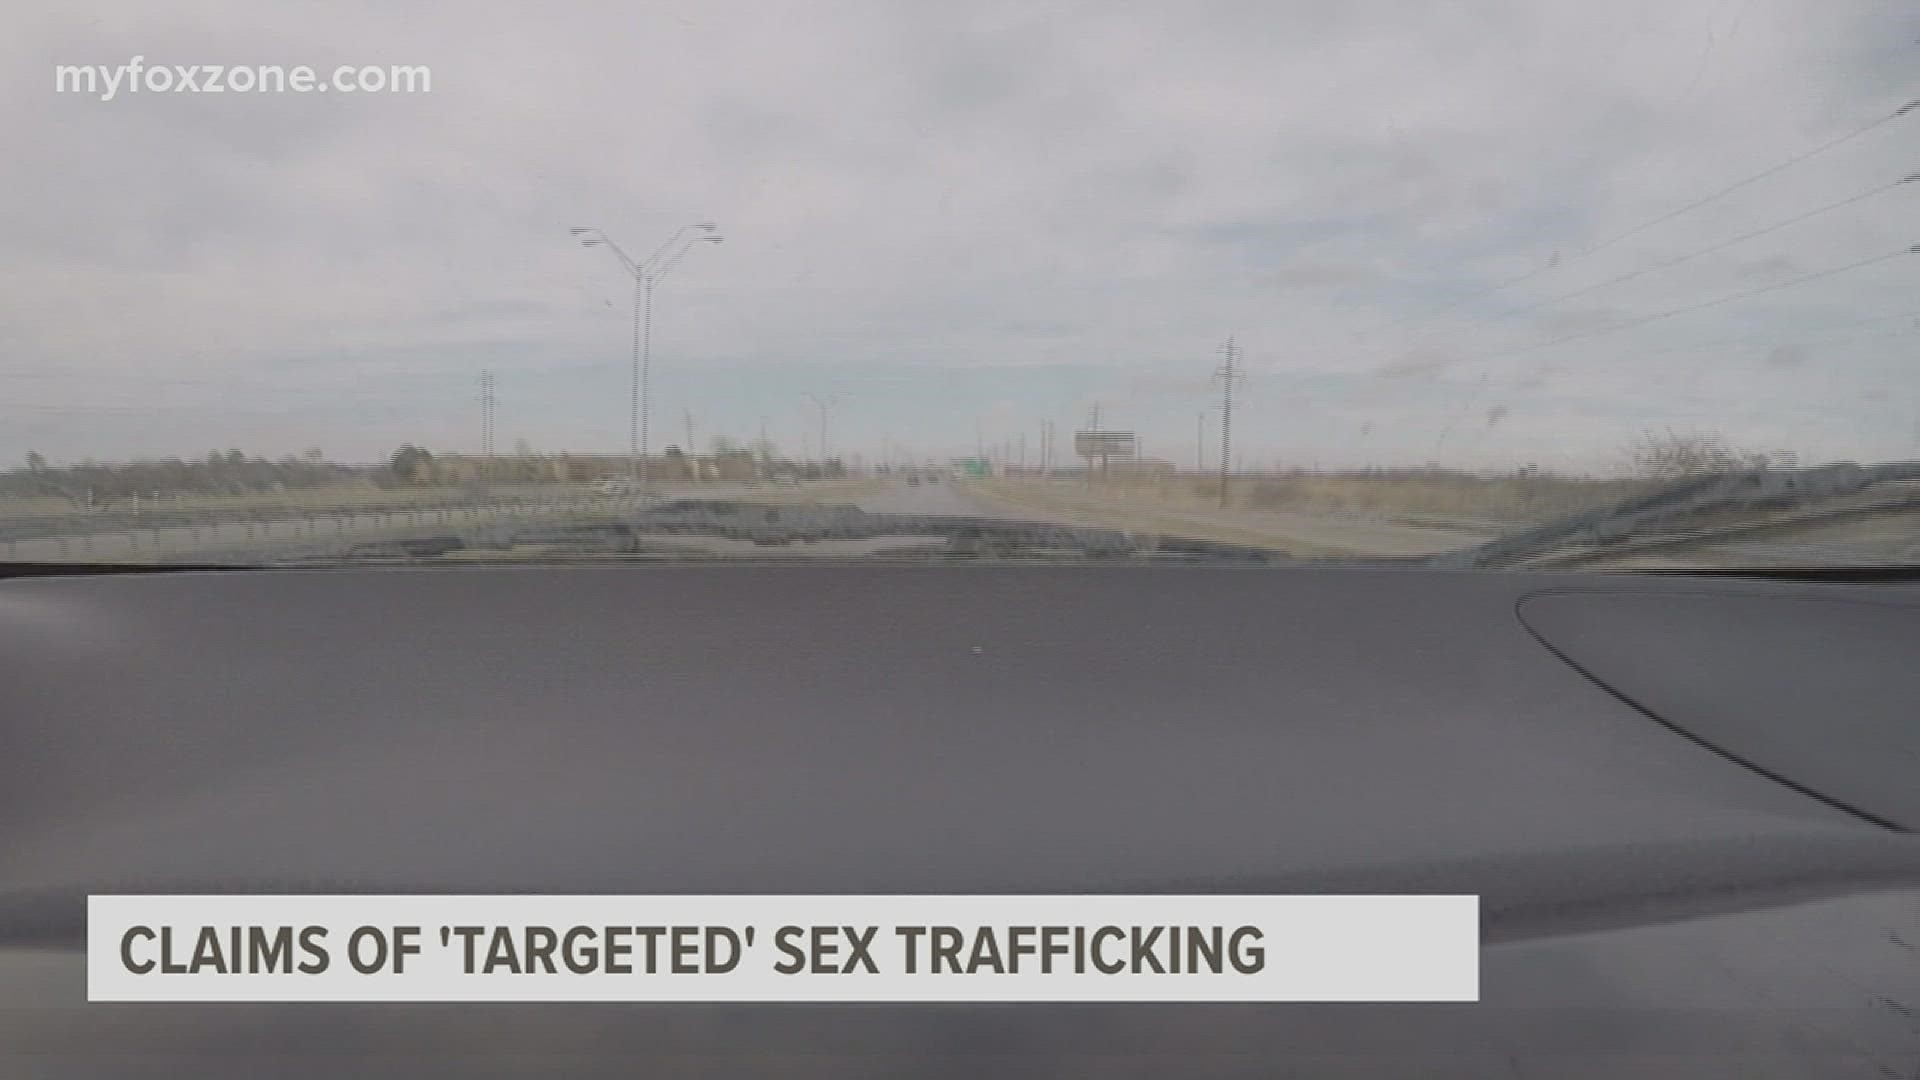 Social media is flooded with posts of people claiming they were targeted for kidnapping or sex trafficking. But how often does this actually happen?